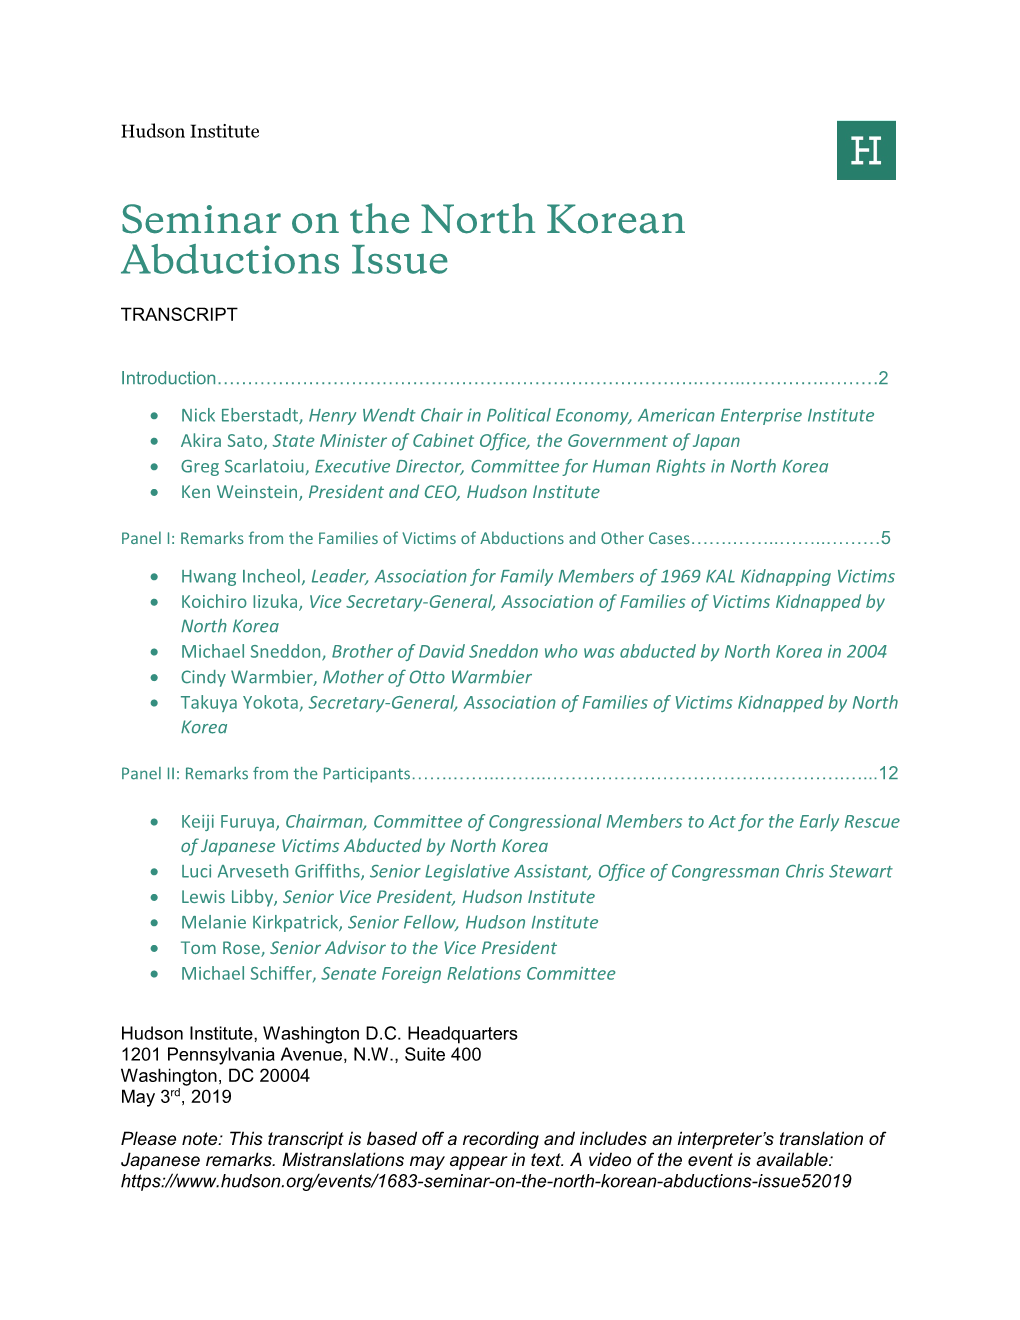 Seminar on the North Korean Abductions Issue